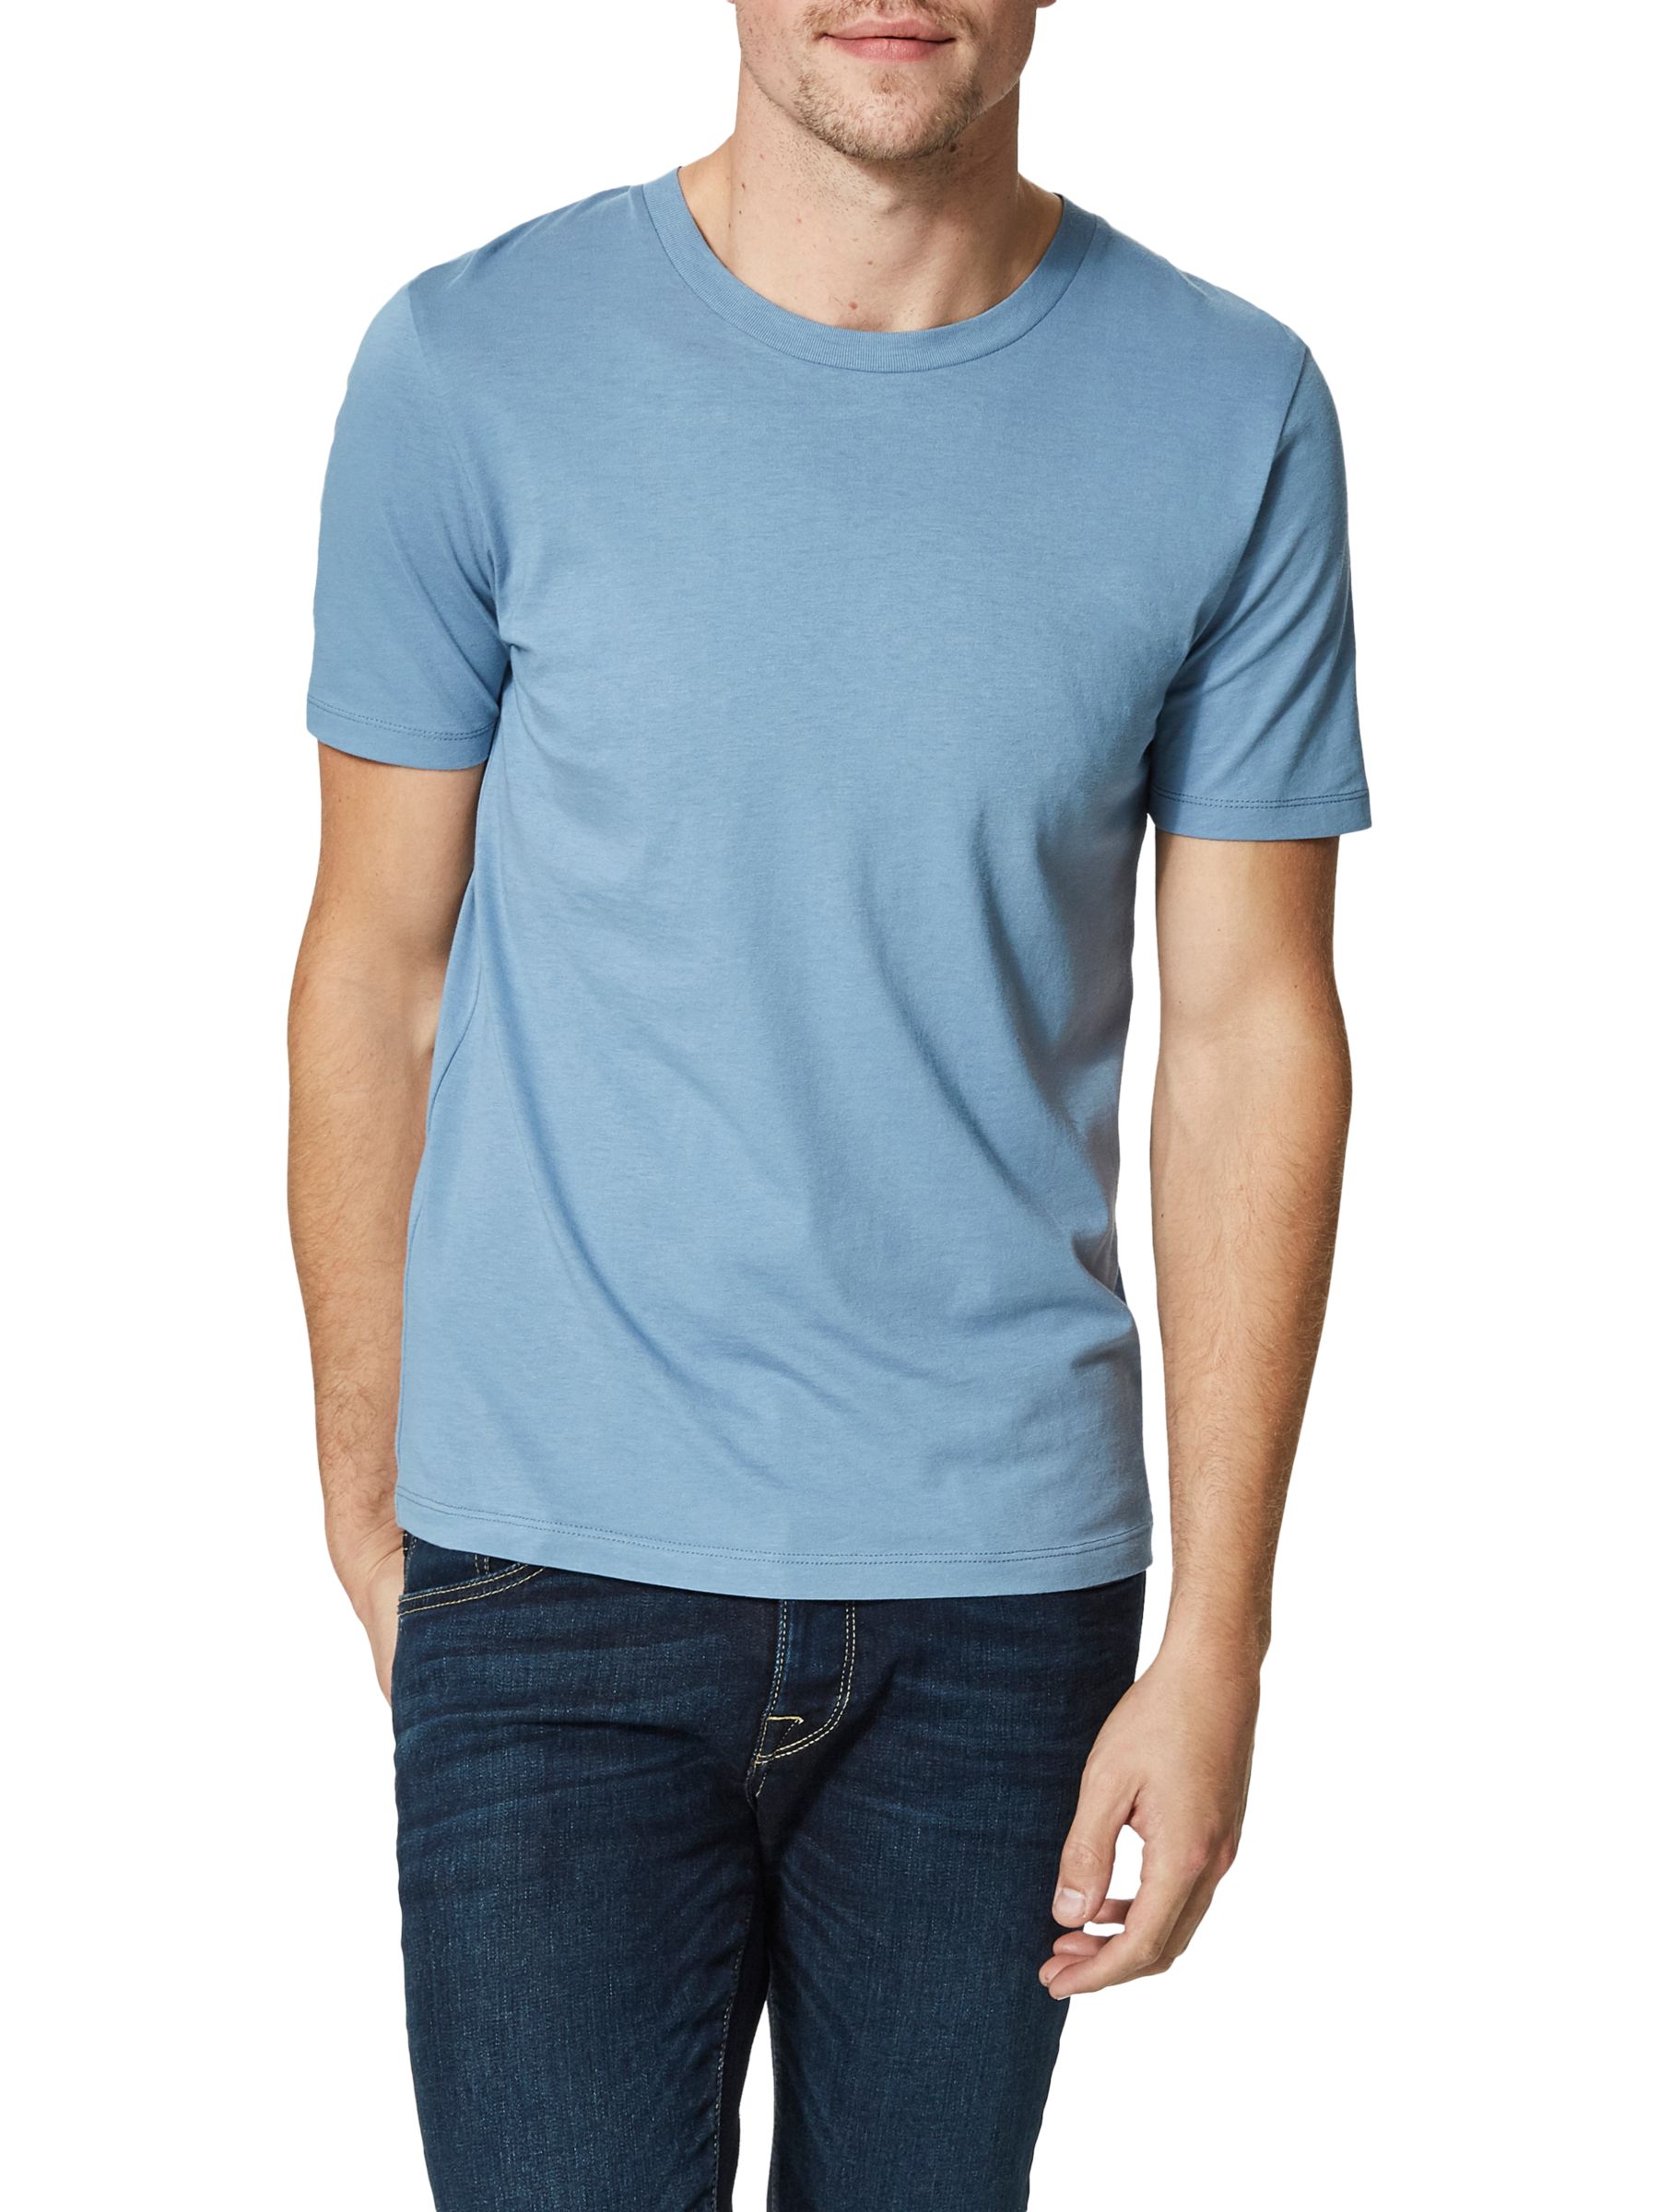 Selected Homme 'The Perfect Tee' Pima Cotton T-Shirt